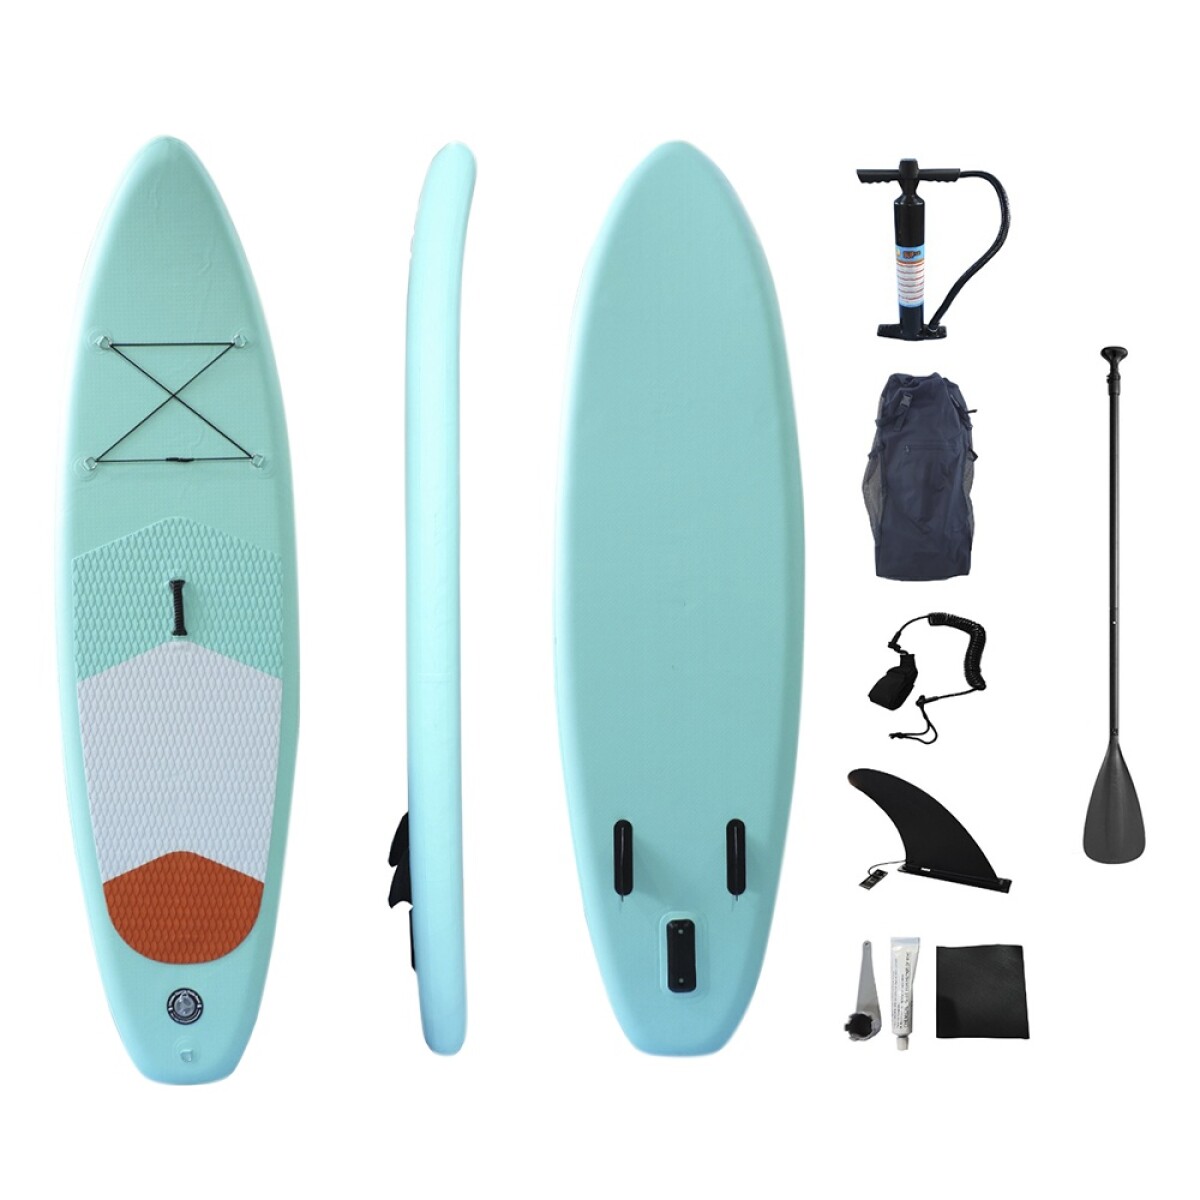 Tabla Stand Up Paddle Sup HT10 + Remo + Inflador + Bolso - Celeste 